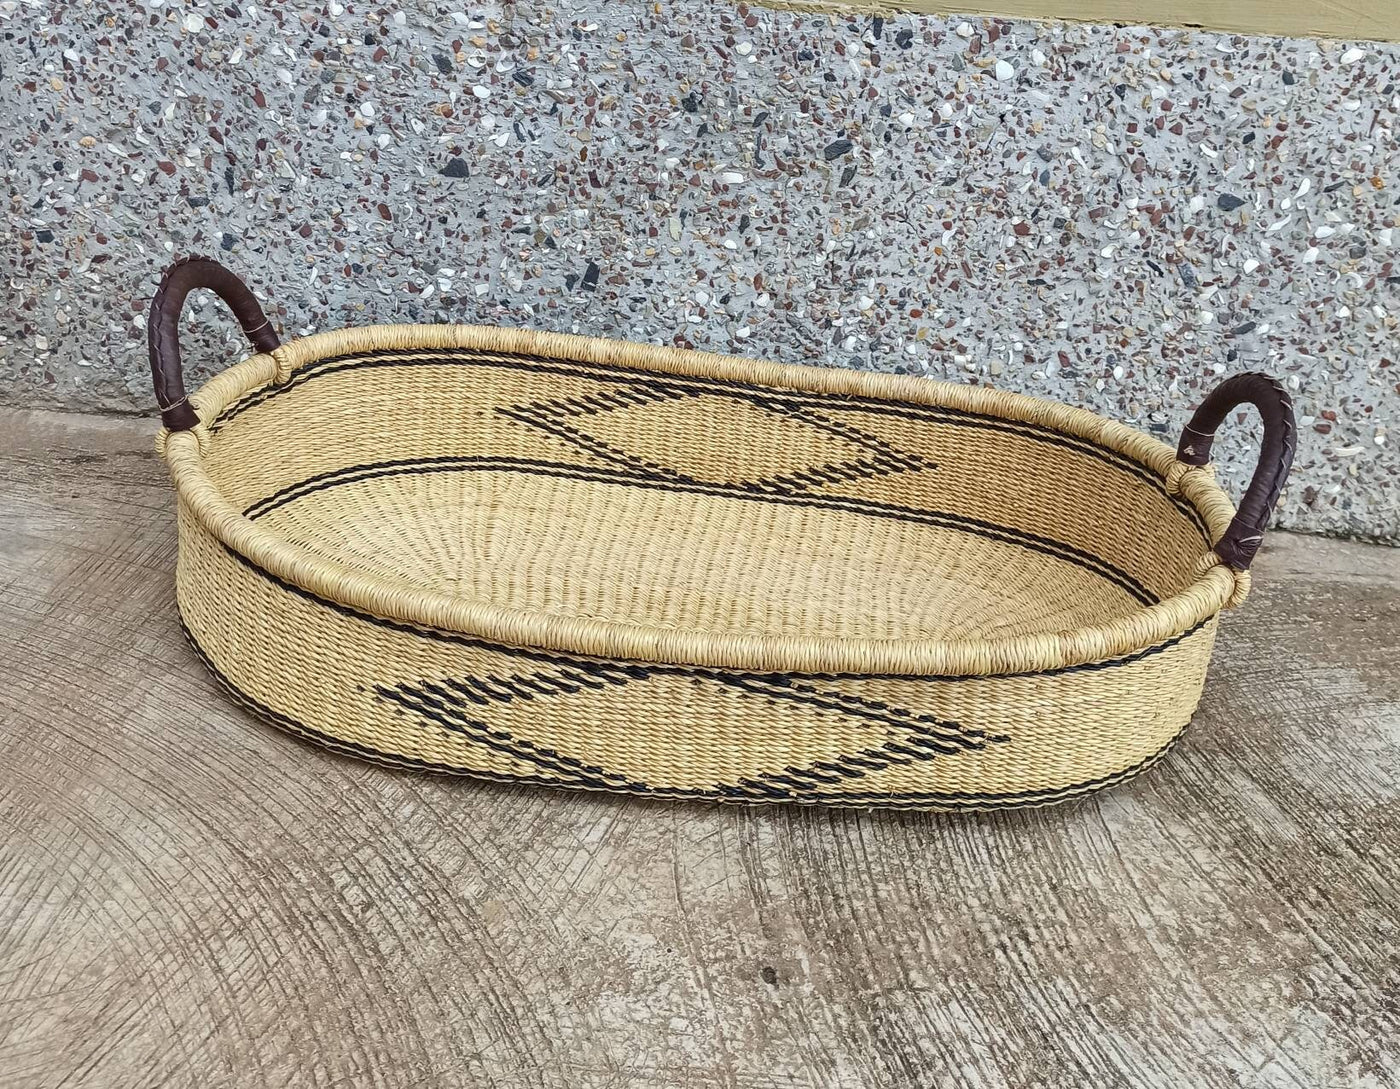 Baby Moses For Baby | Changing Basket | Baby Changing Basket - AfricanheritageGH